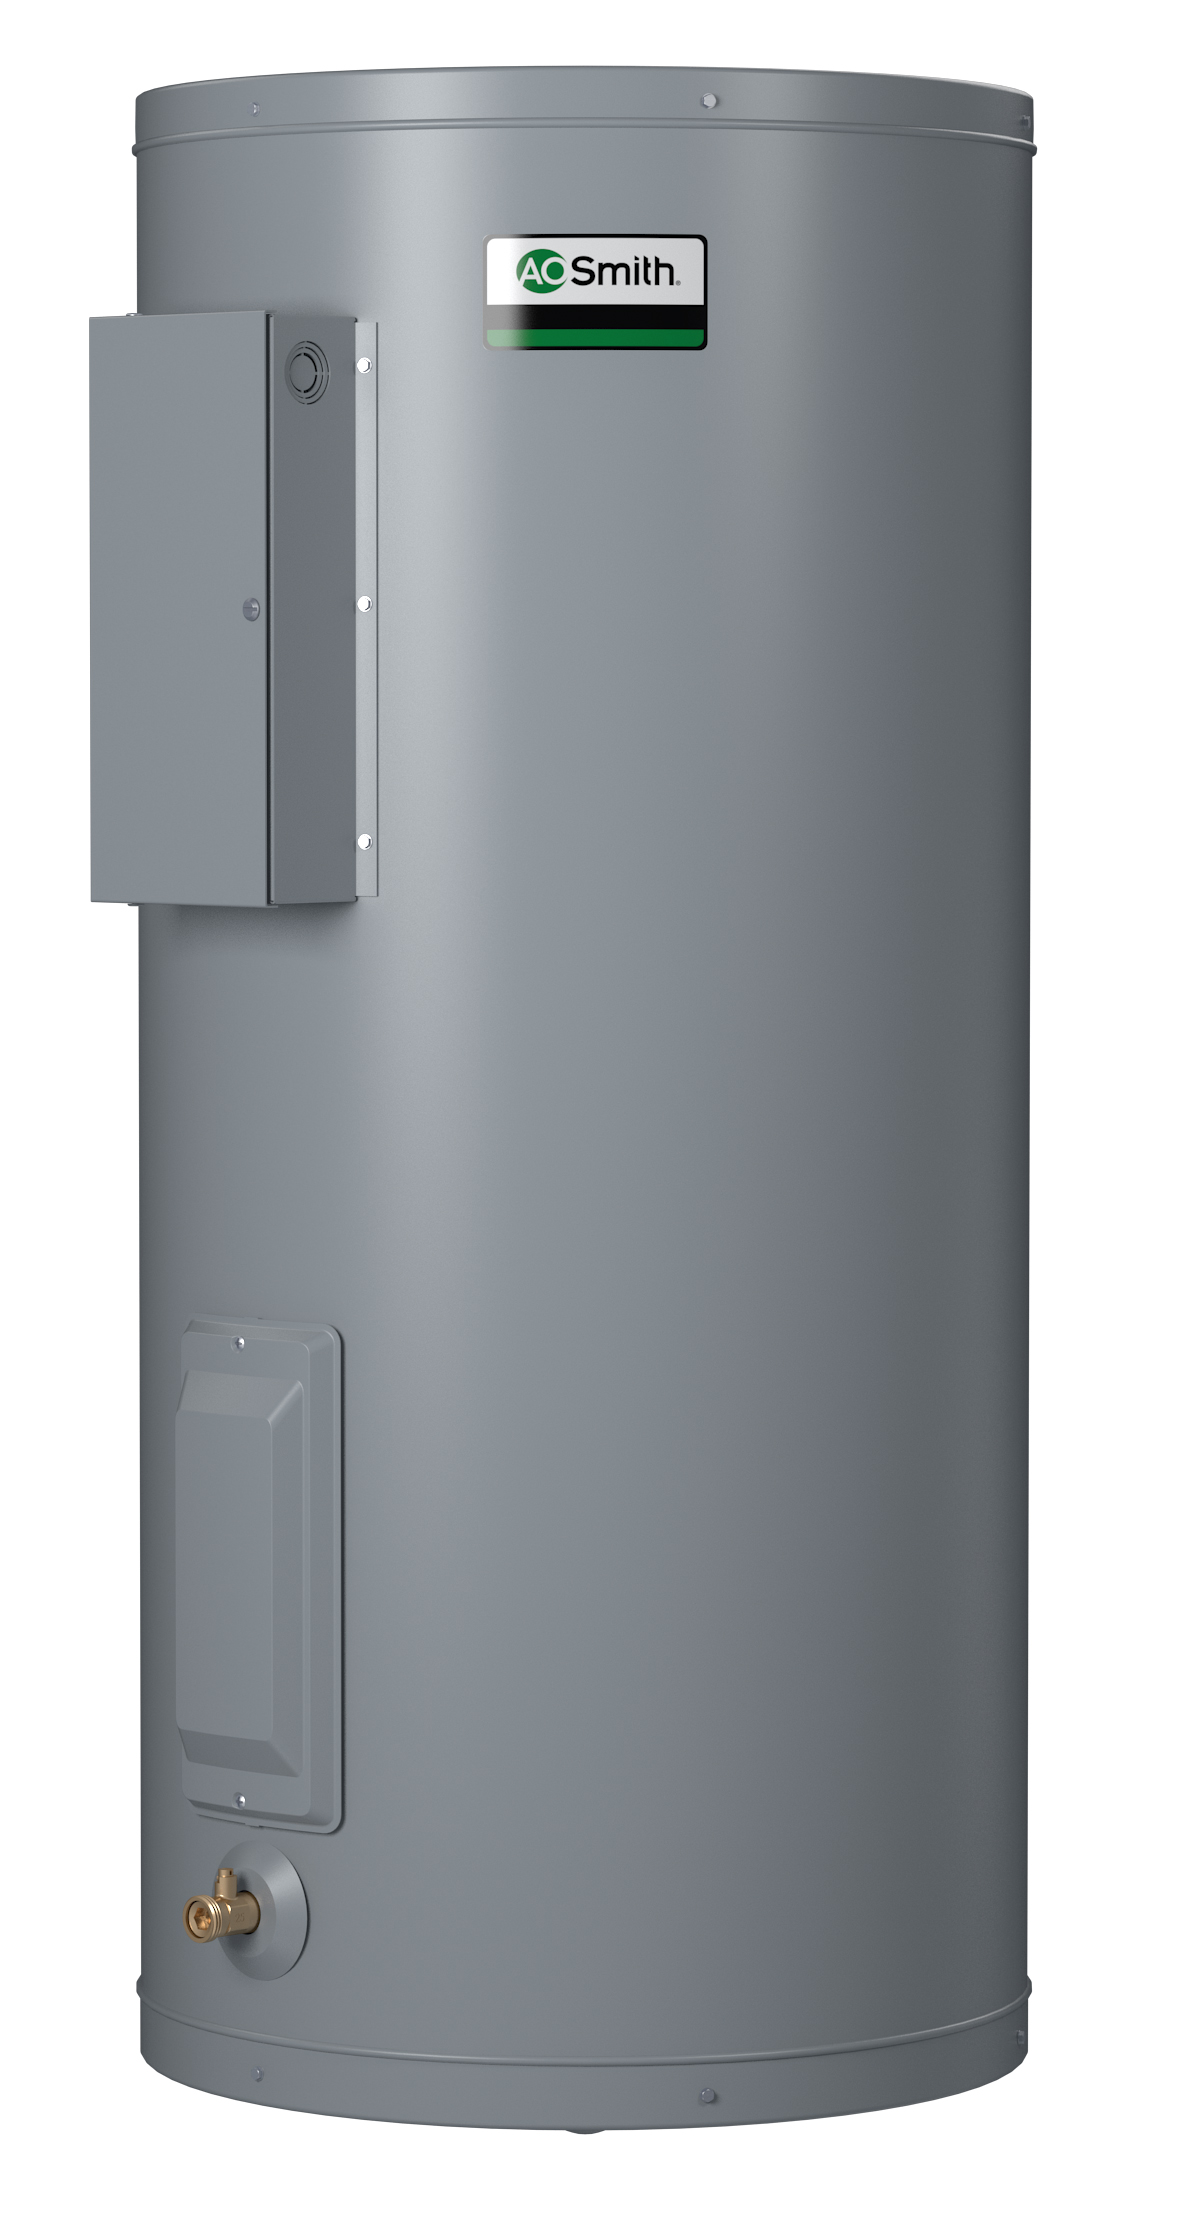 AO SMITH DEN-120D: 120 GALLONS, 2.5 KW, 277 VOLT, 1 PHASE, (2-2500 WATT ELEMENTS, NON-SIMULTANEOUS WIRING), DURA-POWER, LIGHT DUTY COMMERCIAL ELECTRIC WATER HEATER